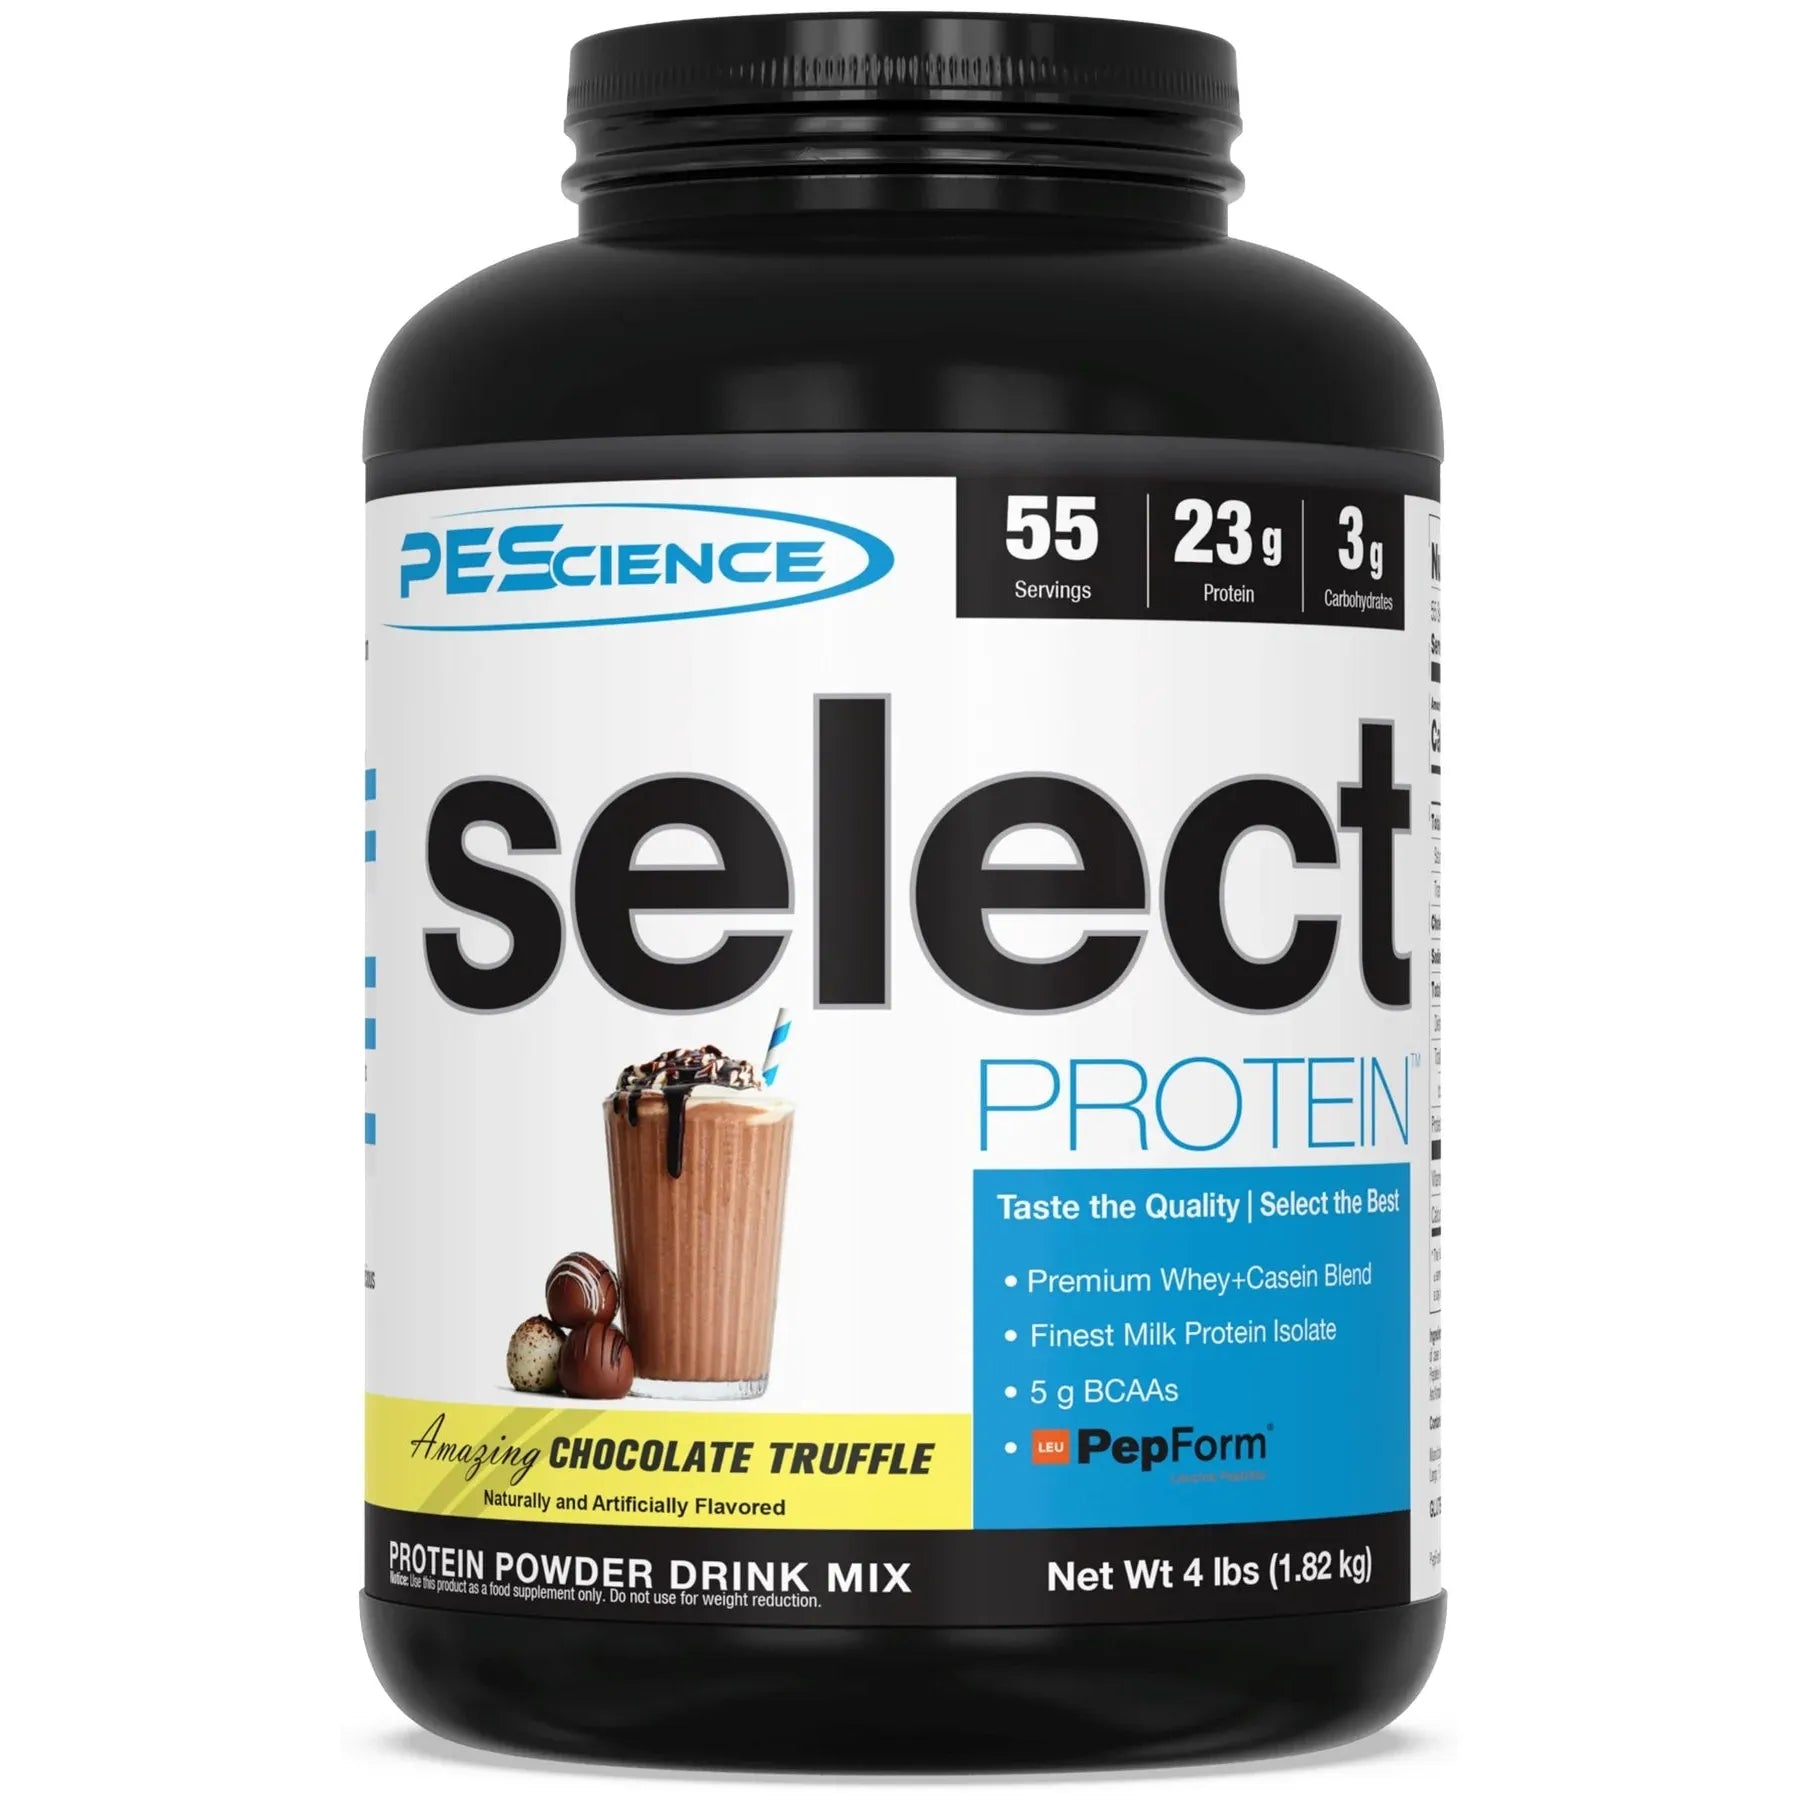 PEScience Select Protein (55 servings) Whey Protein Blend Chocolate Truffle PEScience